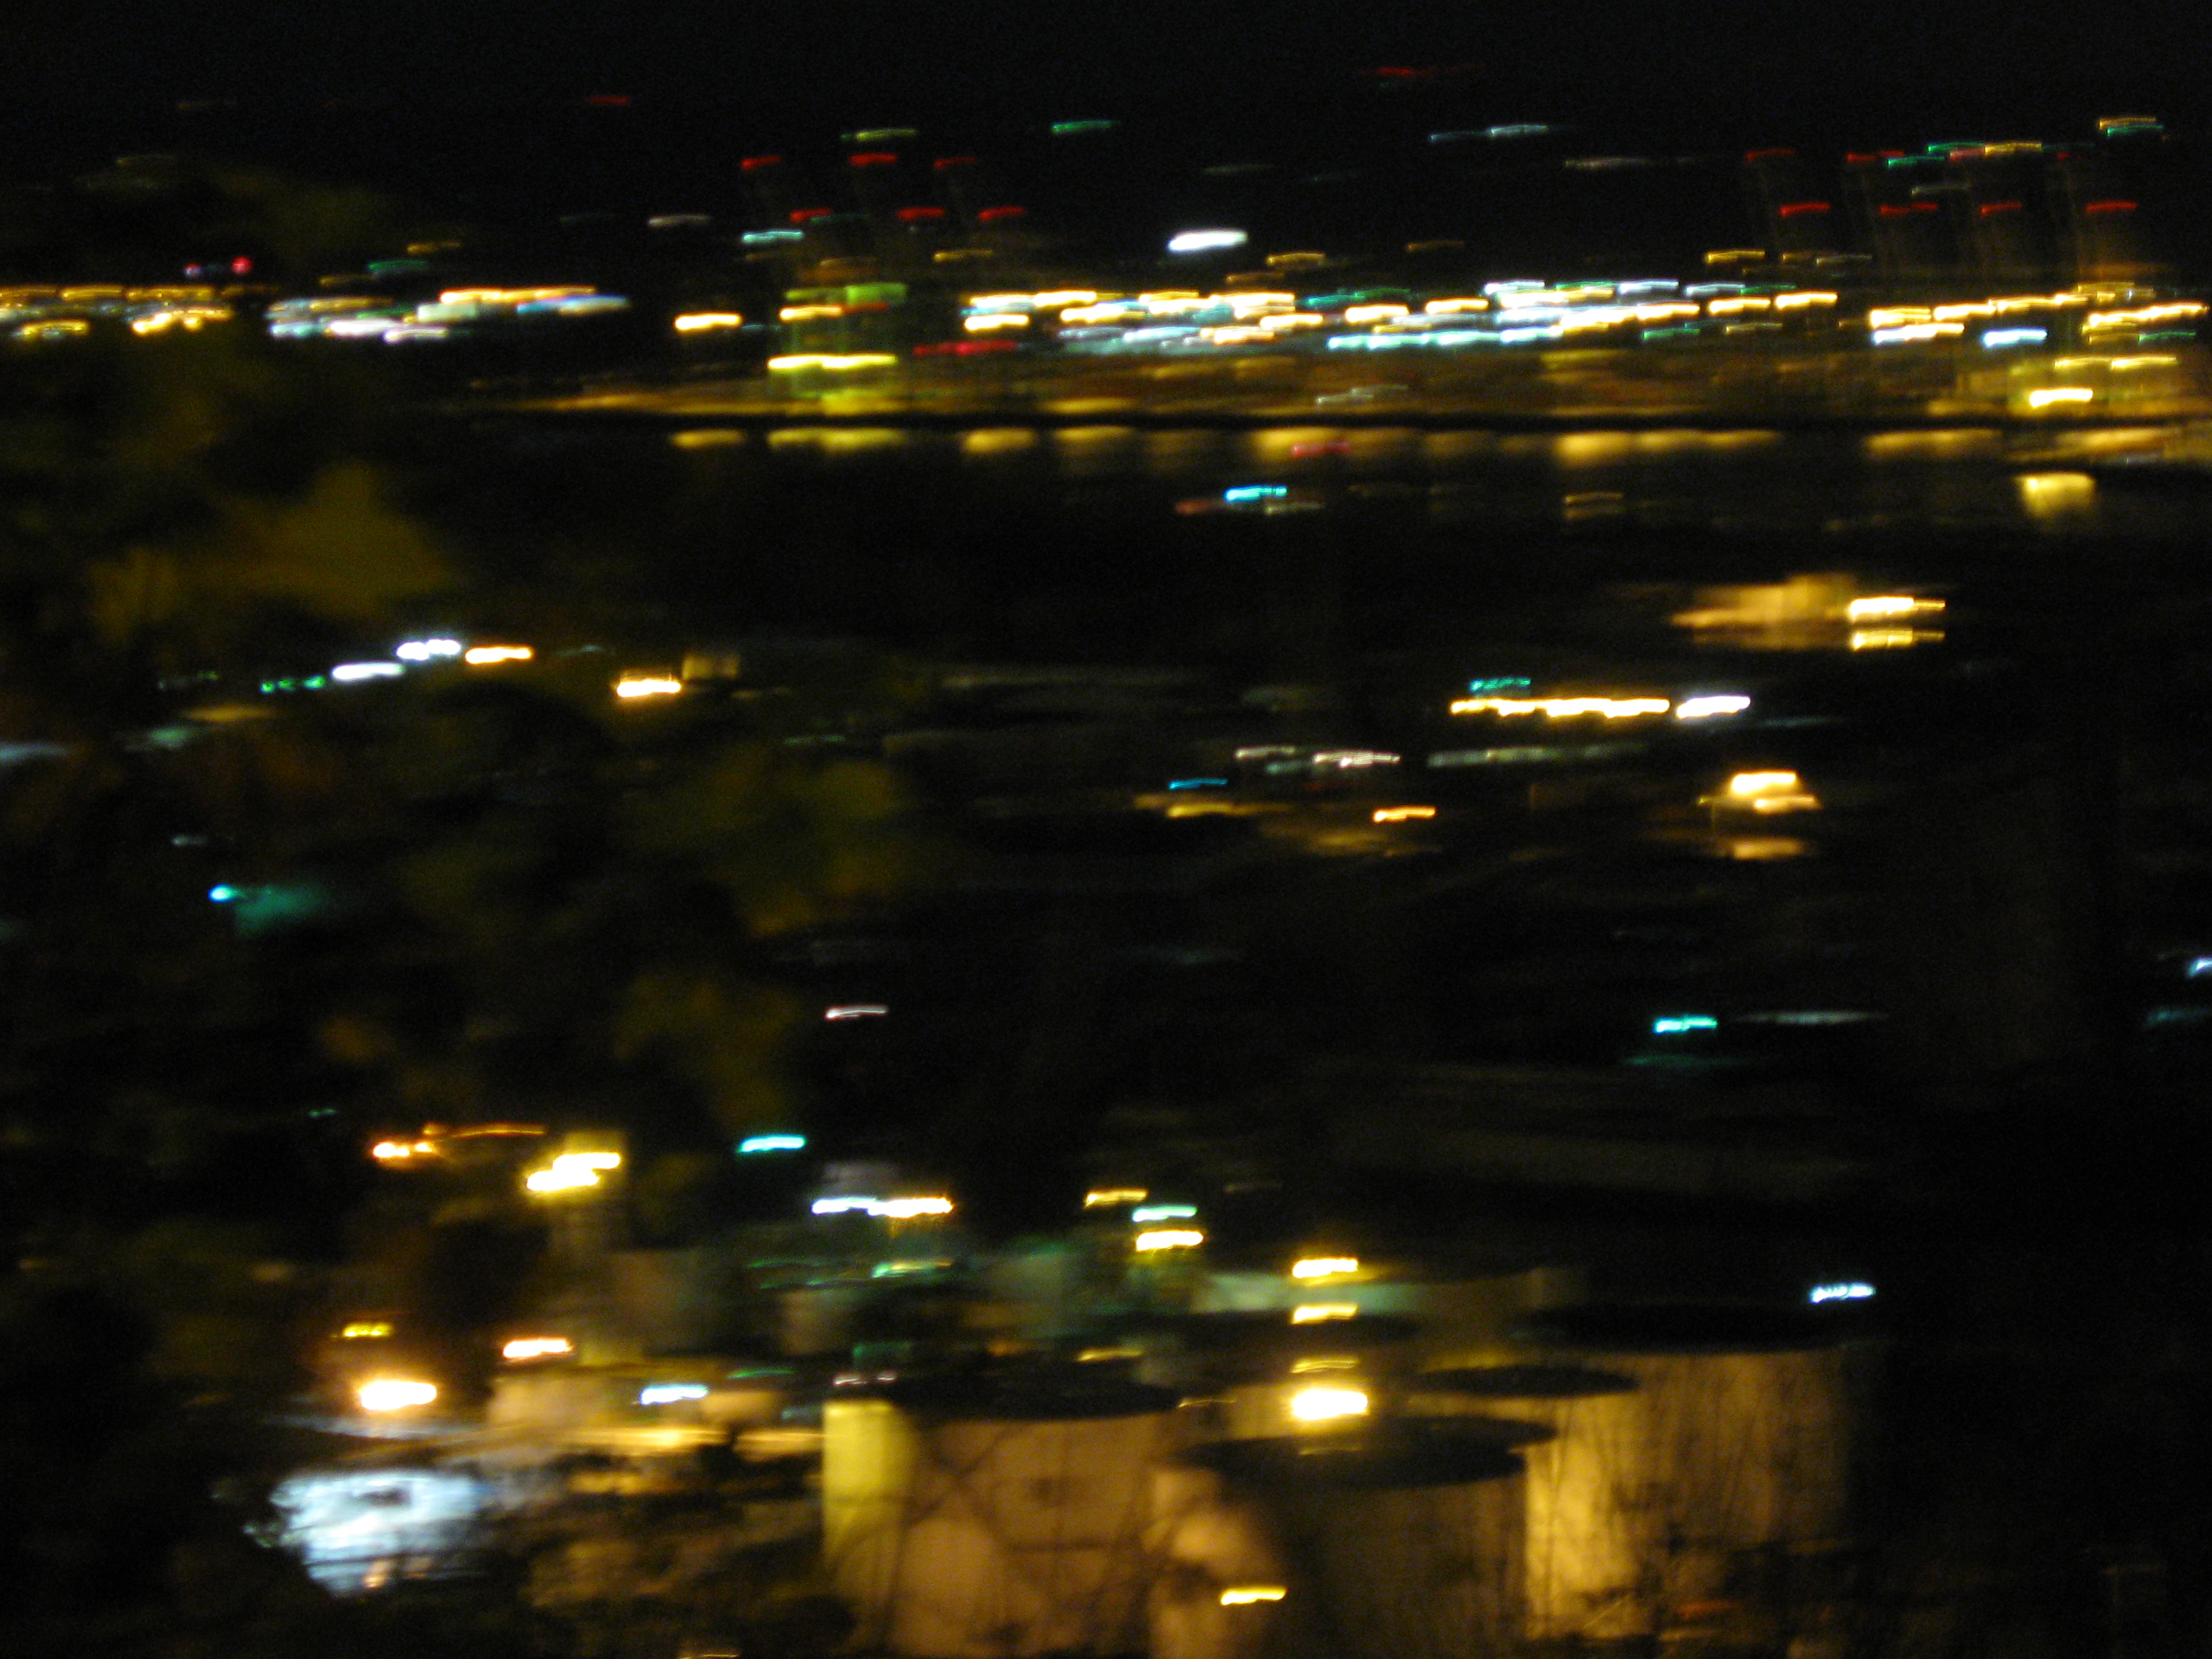 City from hillside near missy's place at night 5 photo